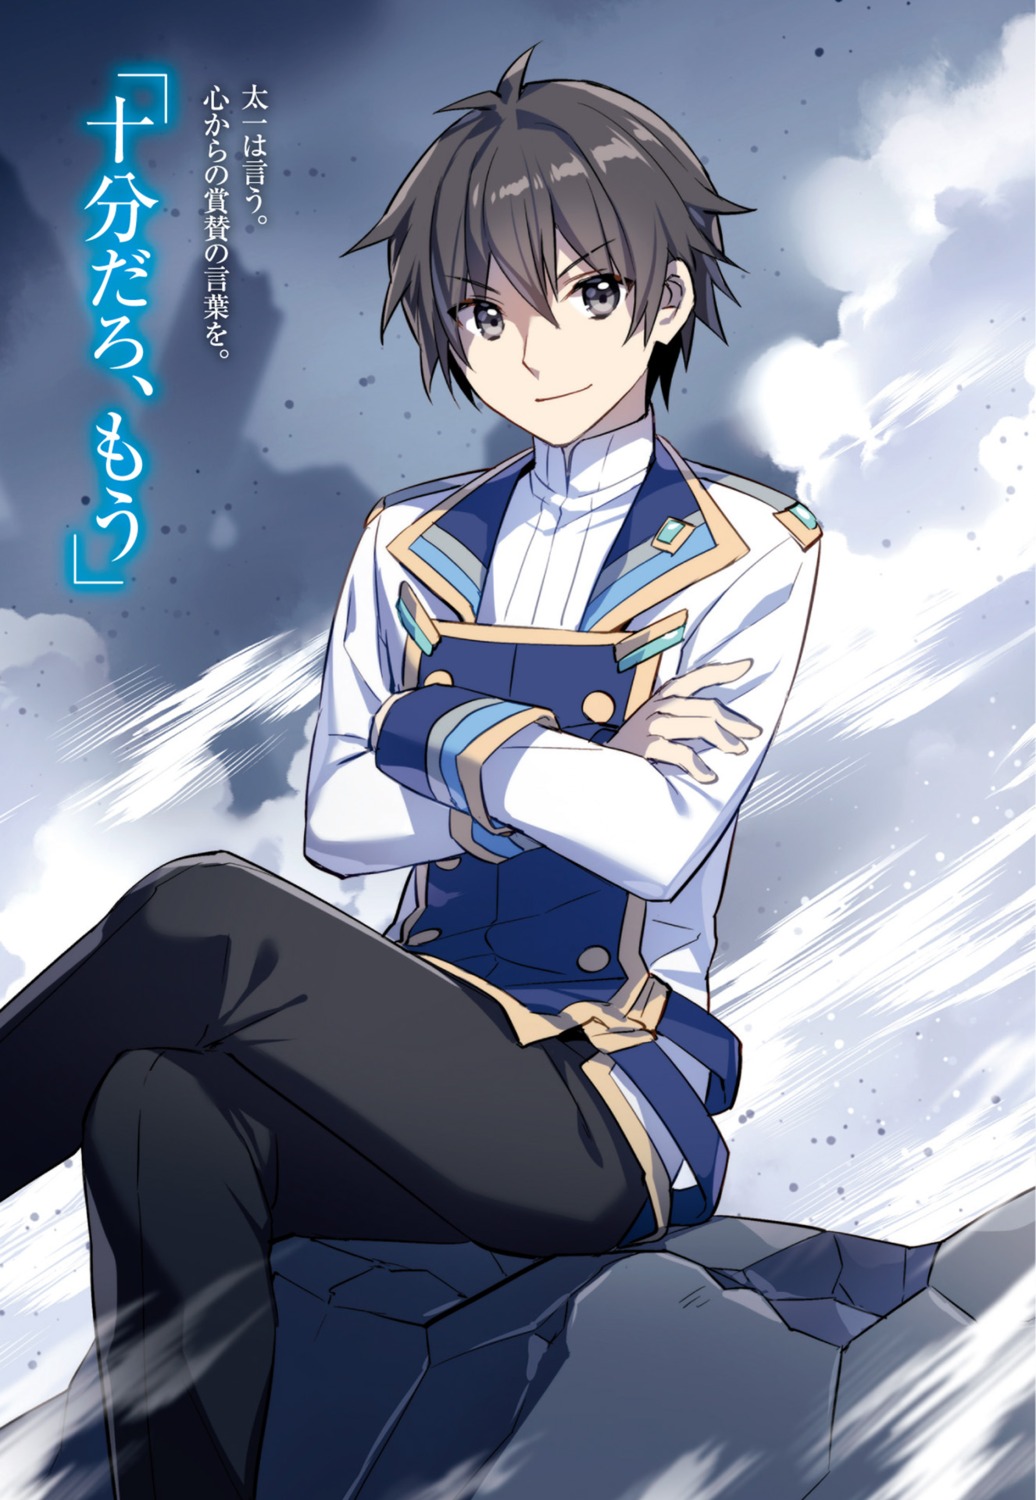 The Best of Anime - 📗Anime : Isekai Cheat Magician (2019) 📘Genres :  Action, Adventure, Fantasy 📙Episodes : 12 Regular high schooler Taichi  Nishimura and his childhood friend, Rin Azuma, are on